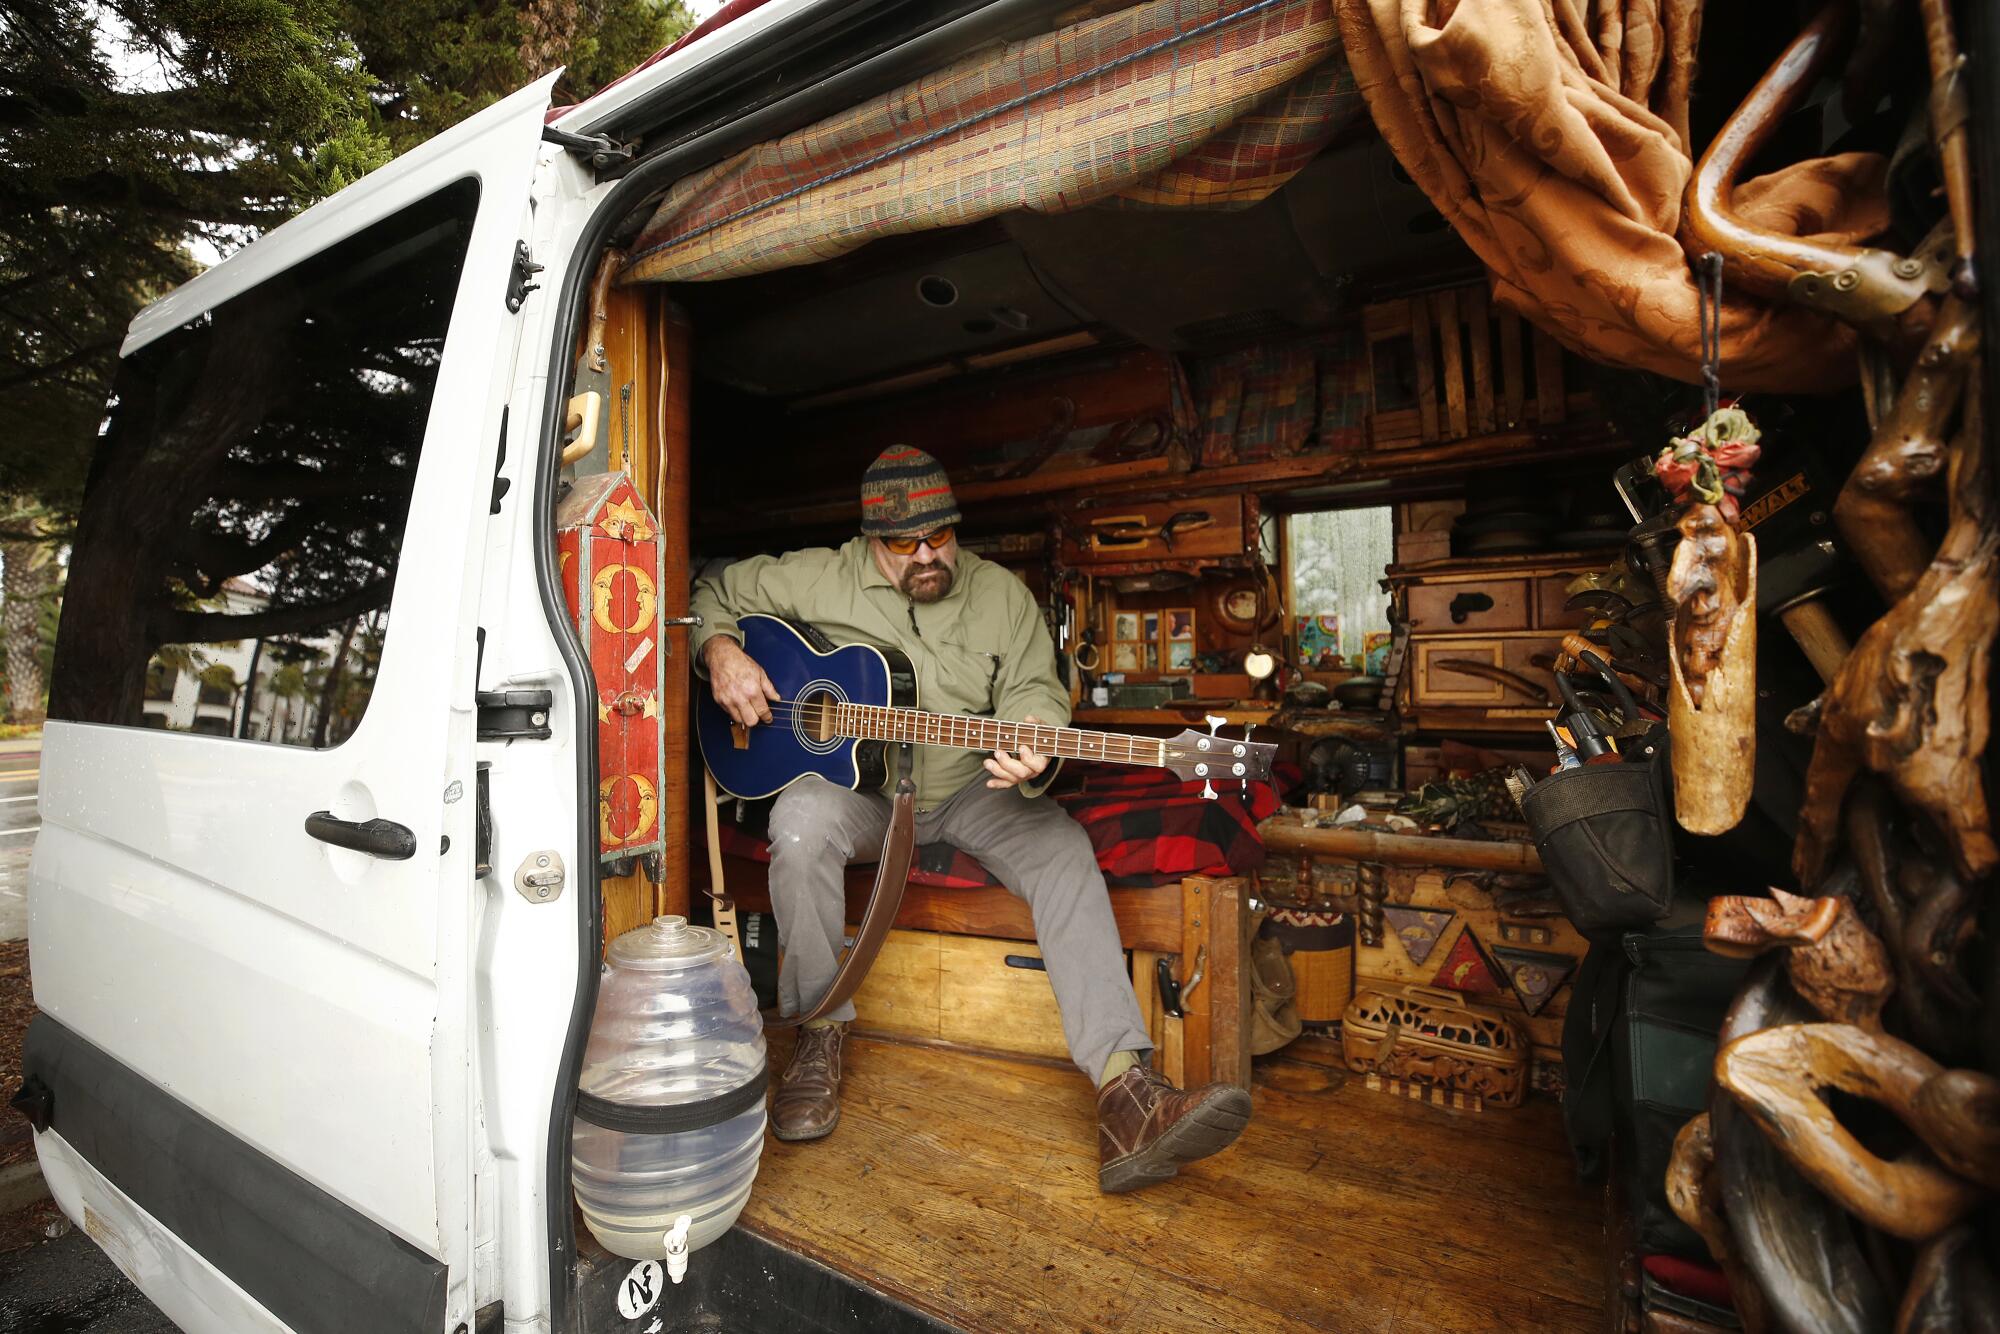 Musician and carpenter Doug Jaffe plays his guitar as he composes music in this van parked along East Beach in Santa Barbara.